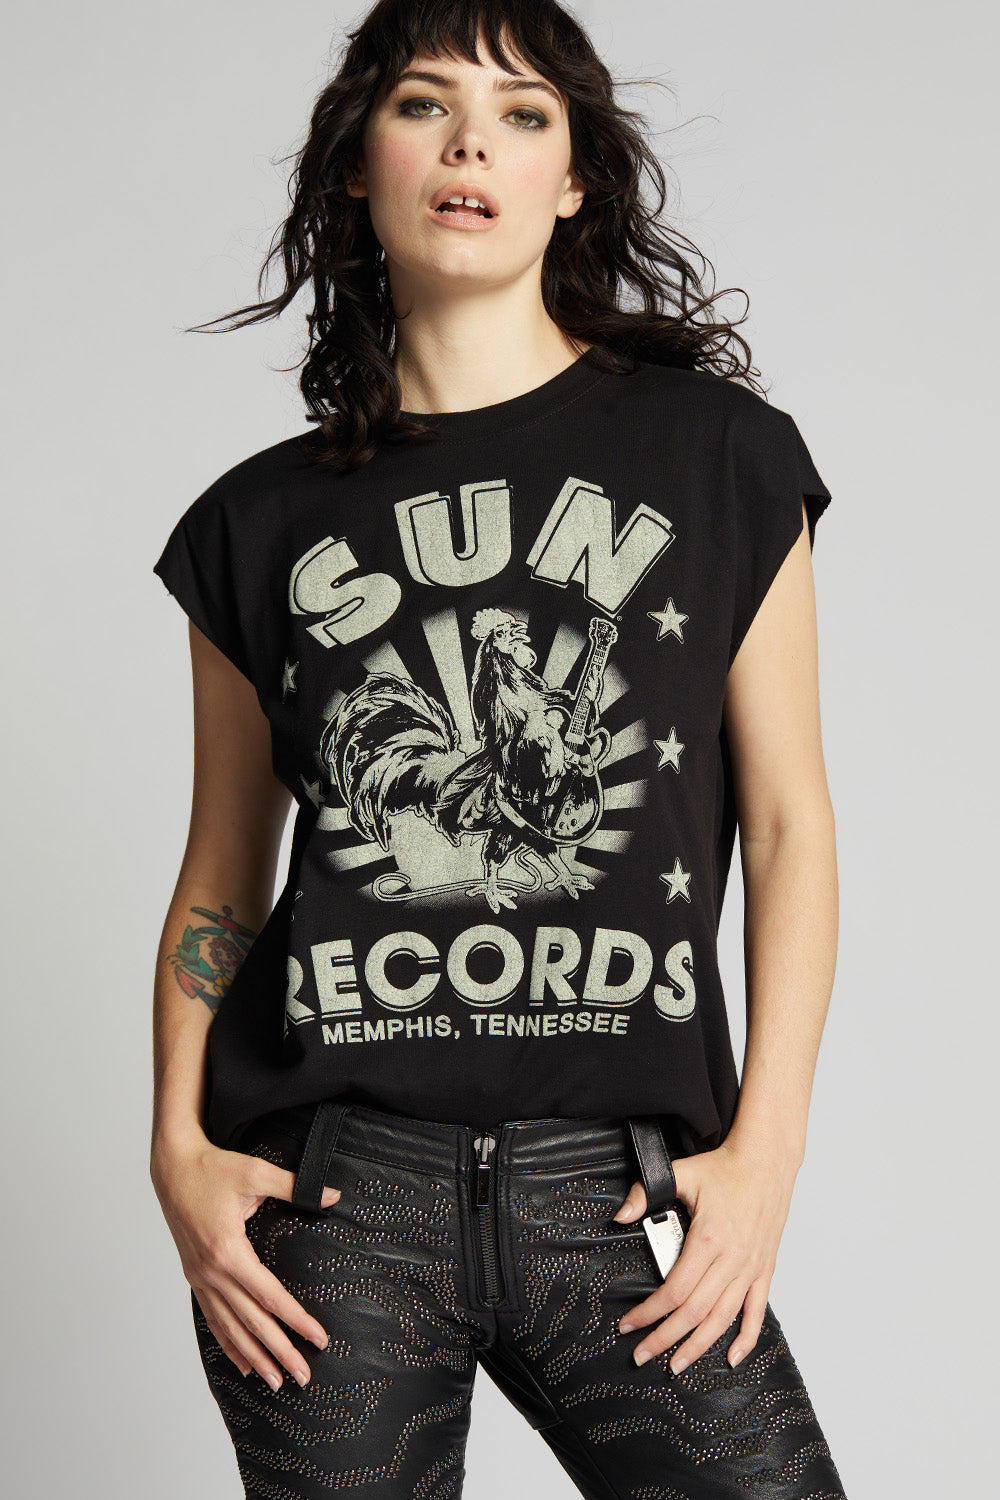 Sun Records Rooster Cut Sleeve Tee